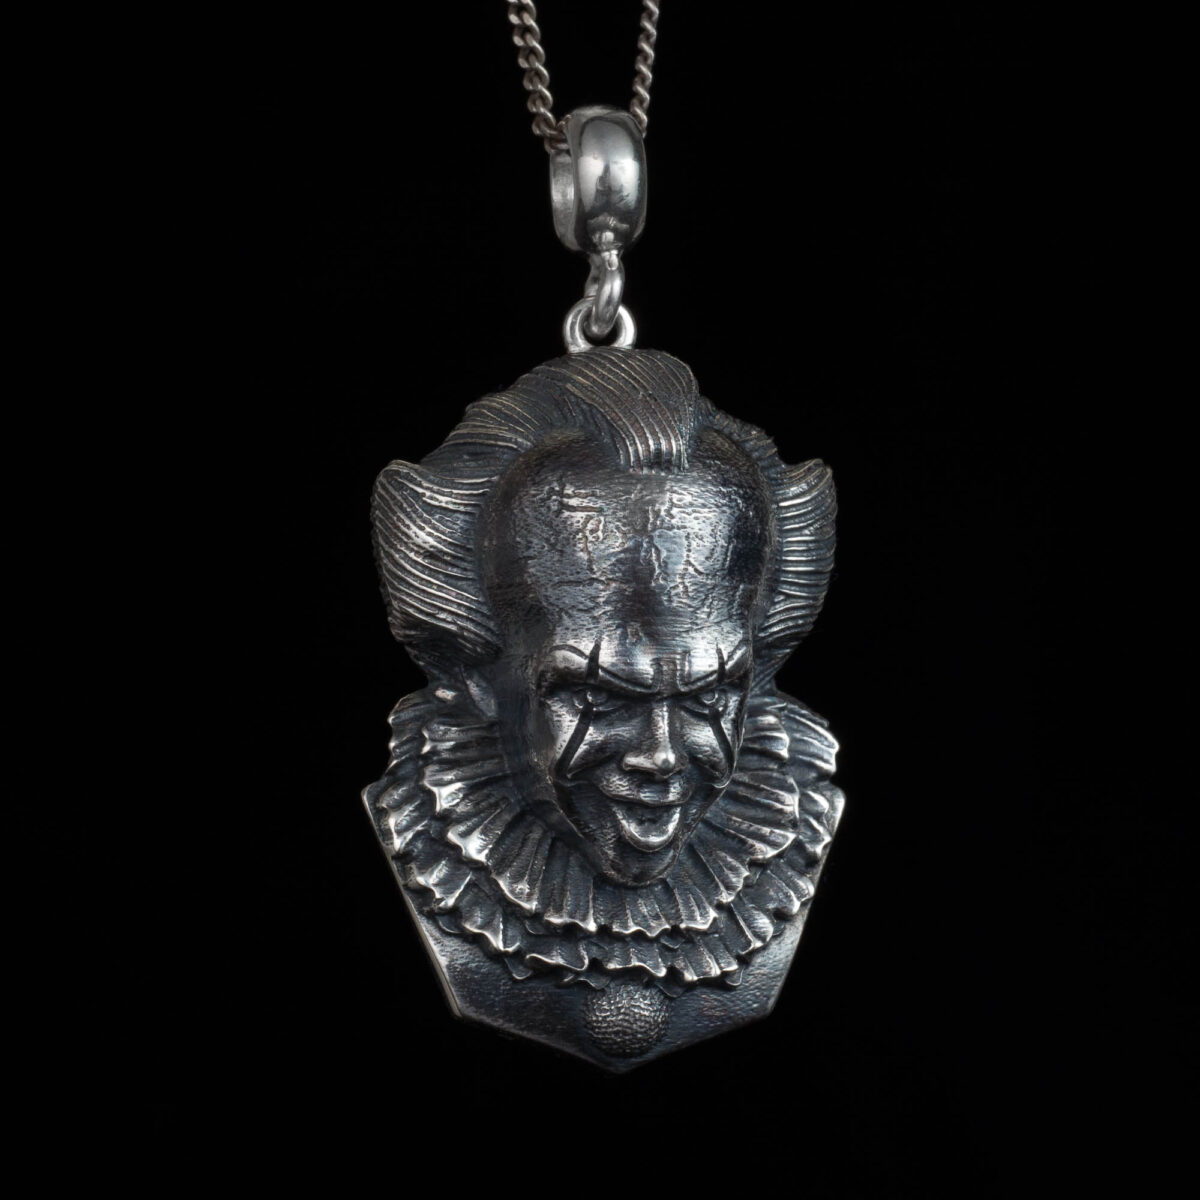 Pennywise Clown 2017 Horror Pendant